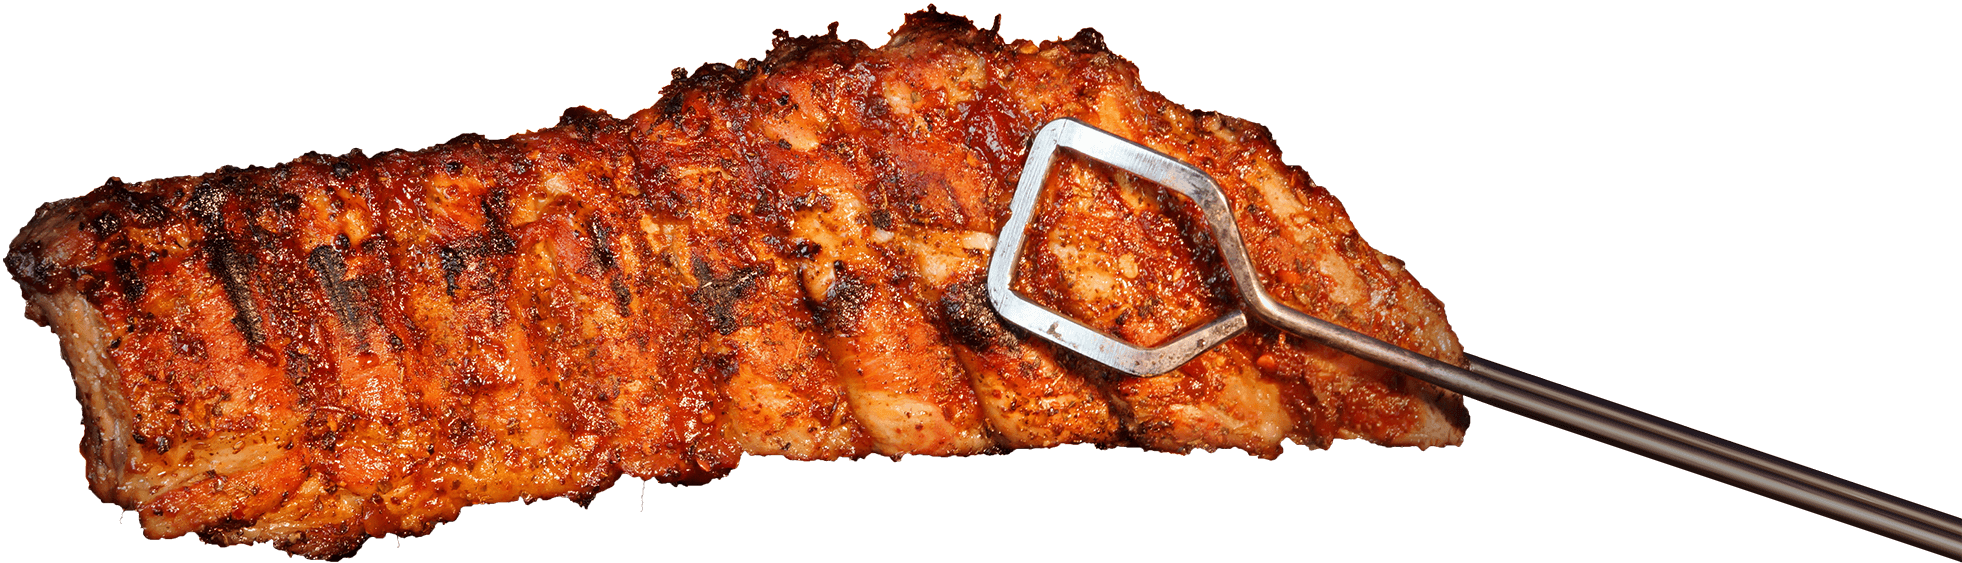 Barbecue Chicken Roasted PNG Download Free PNG Image